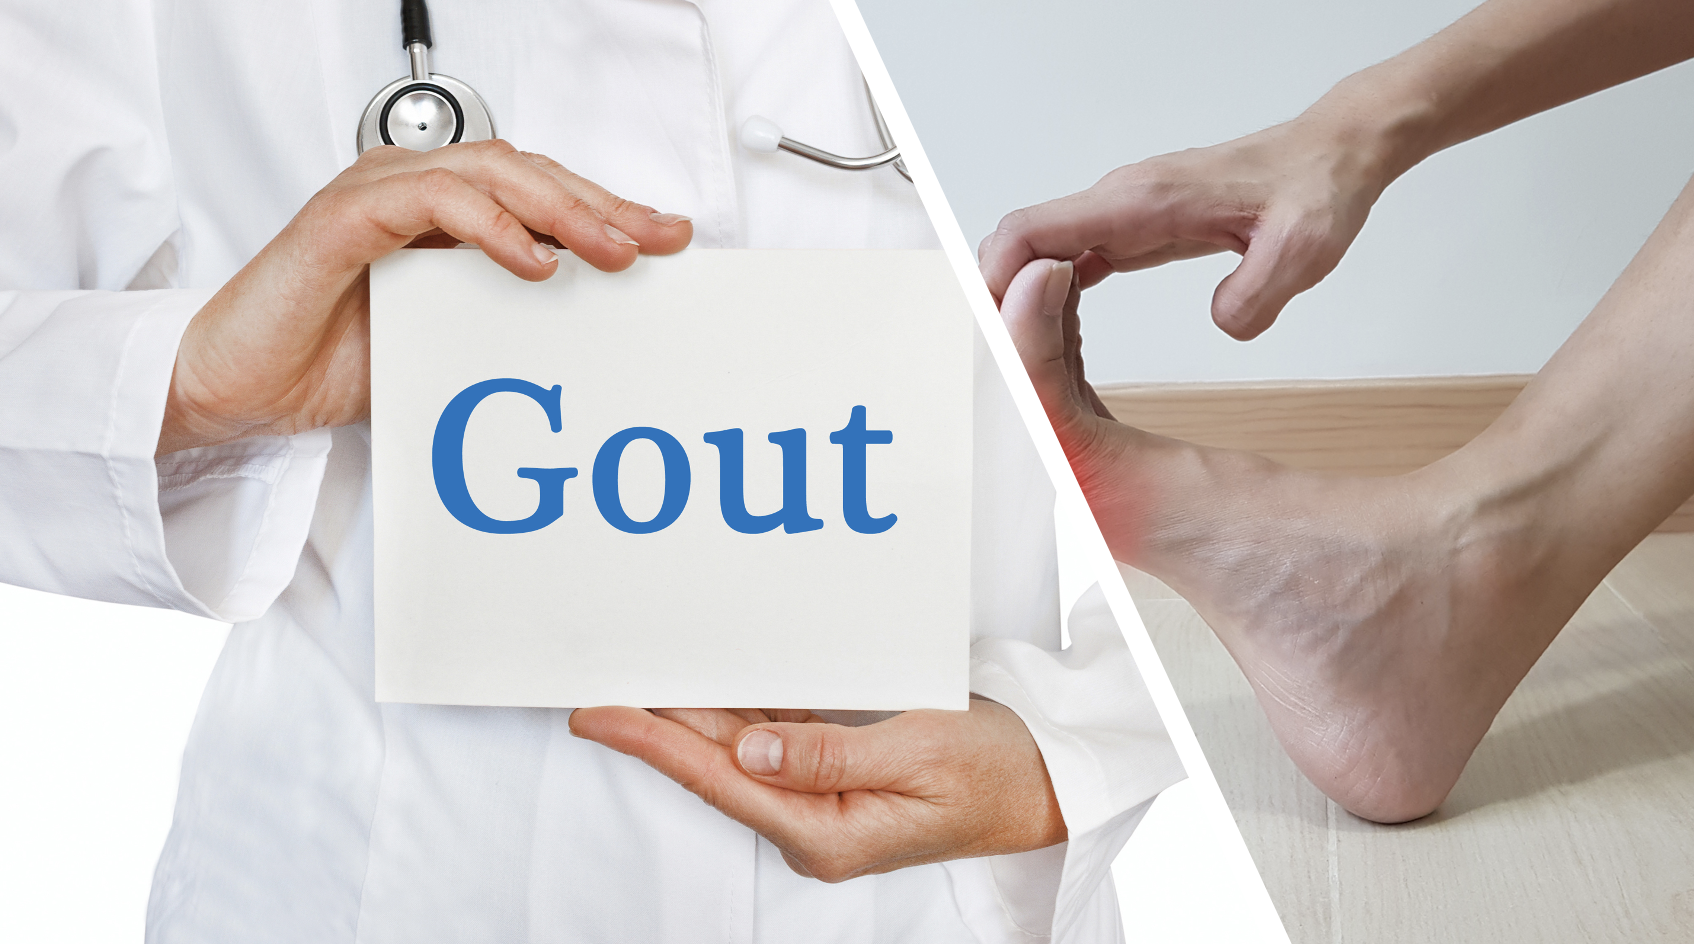 Anakinra Proves to Be an Effective Alternative Treatment for Gout Flares